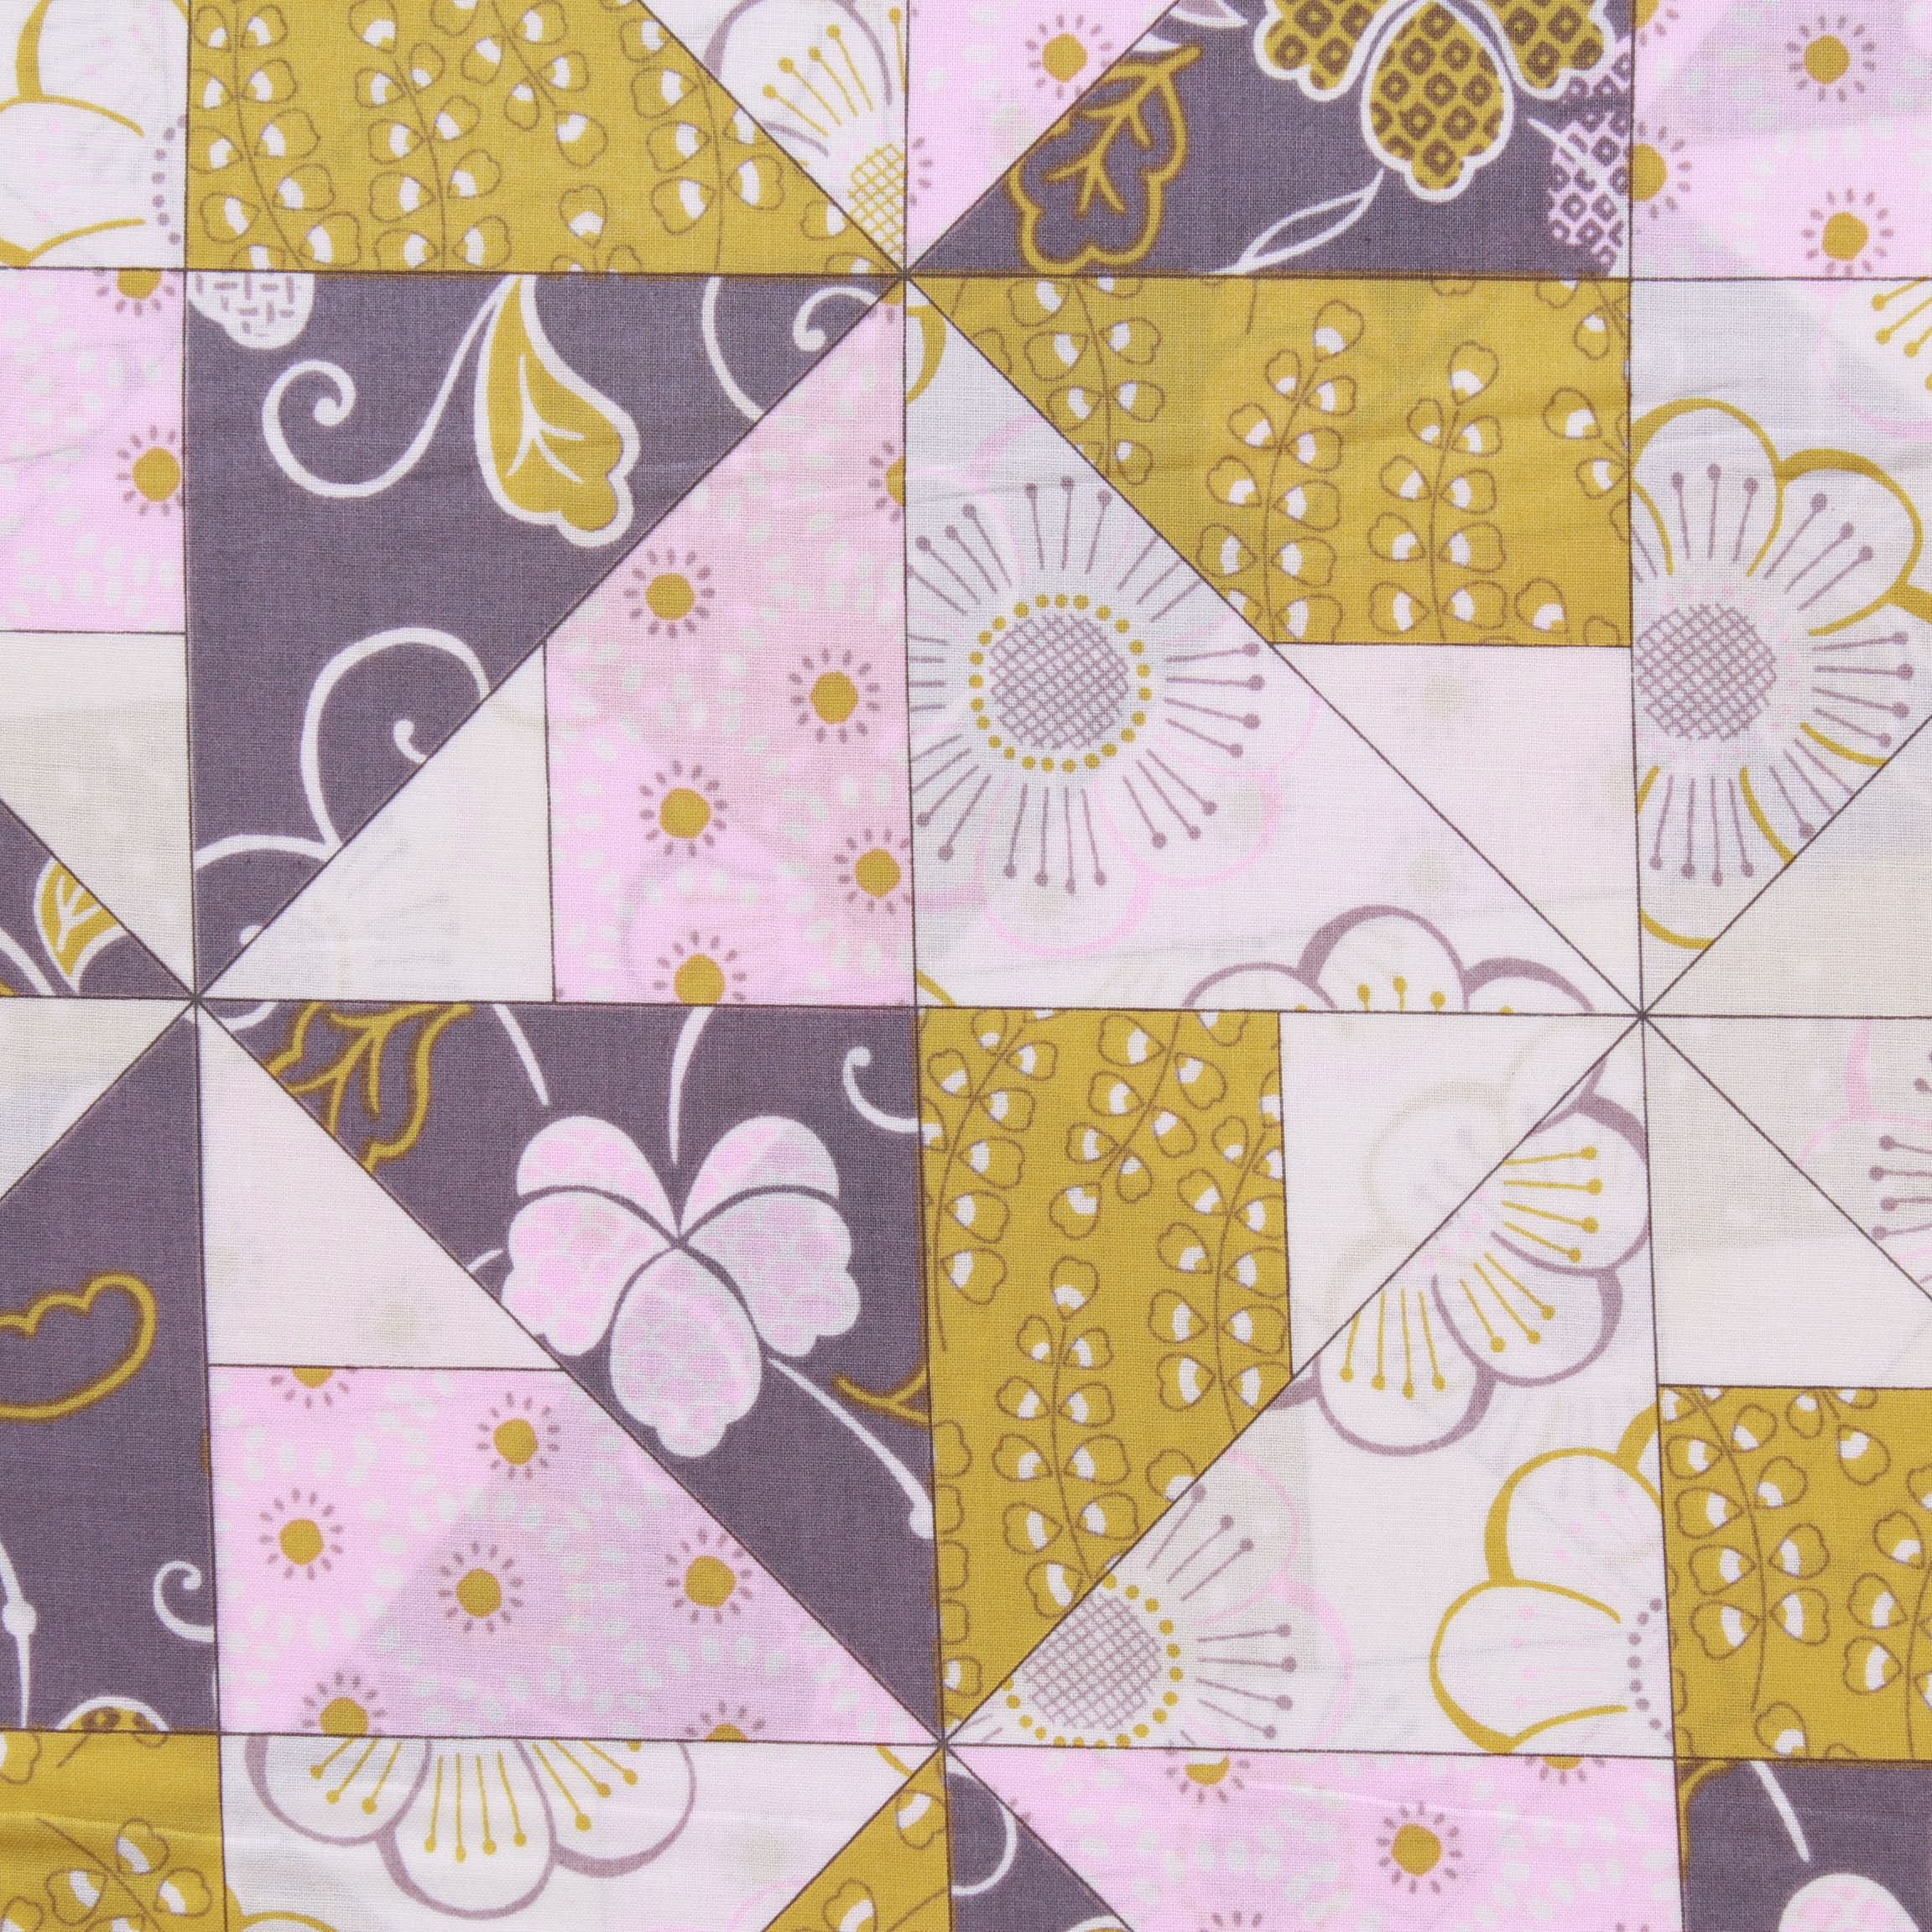 100% Cotton Lawn, 'Pink Geometric Ditsy Floral', 58" Wide